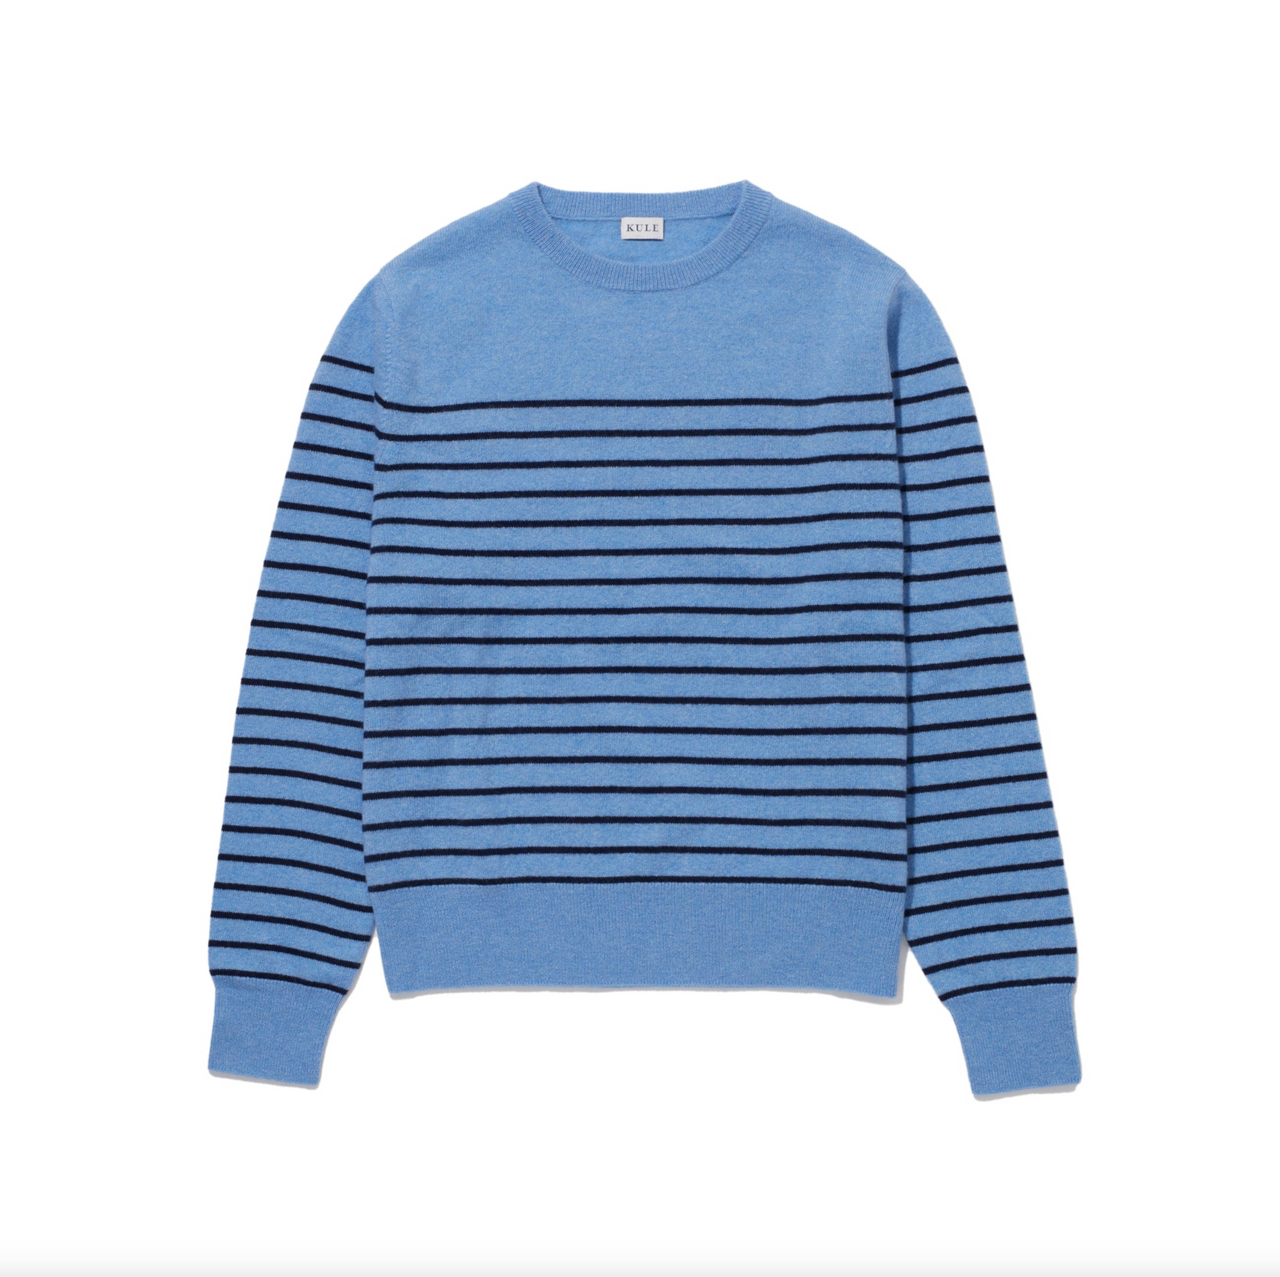 Kule The Betty - French Blue/Navy